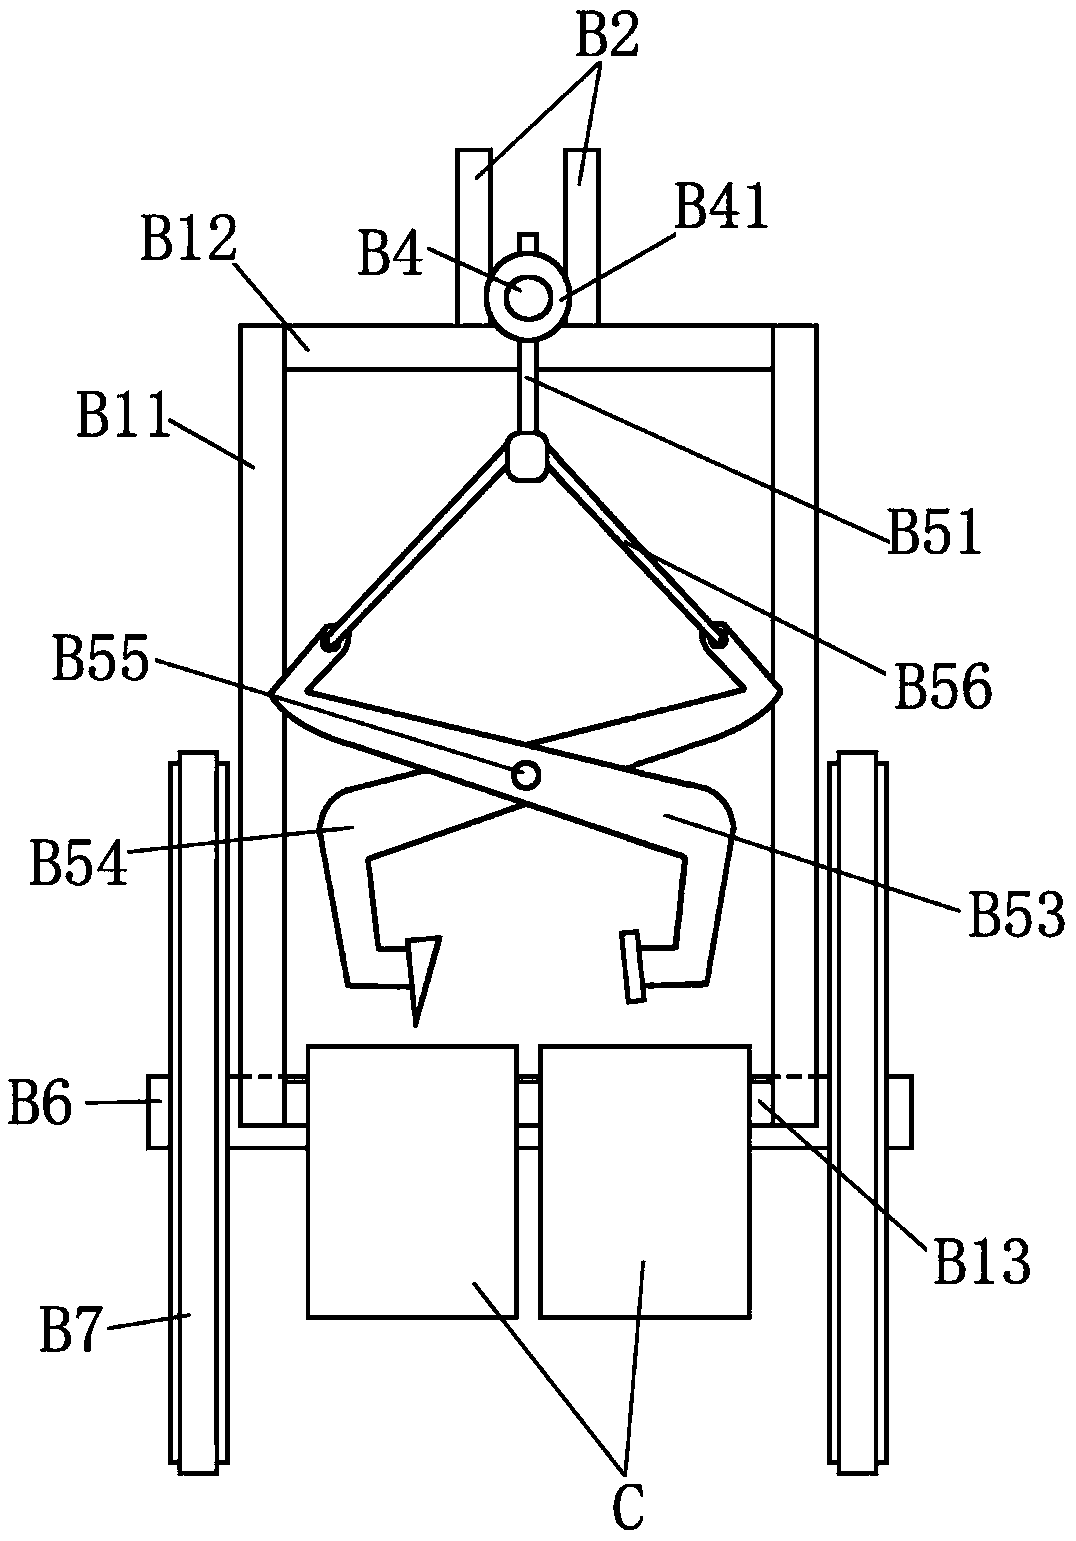 Novel curb lifting and carrying device